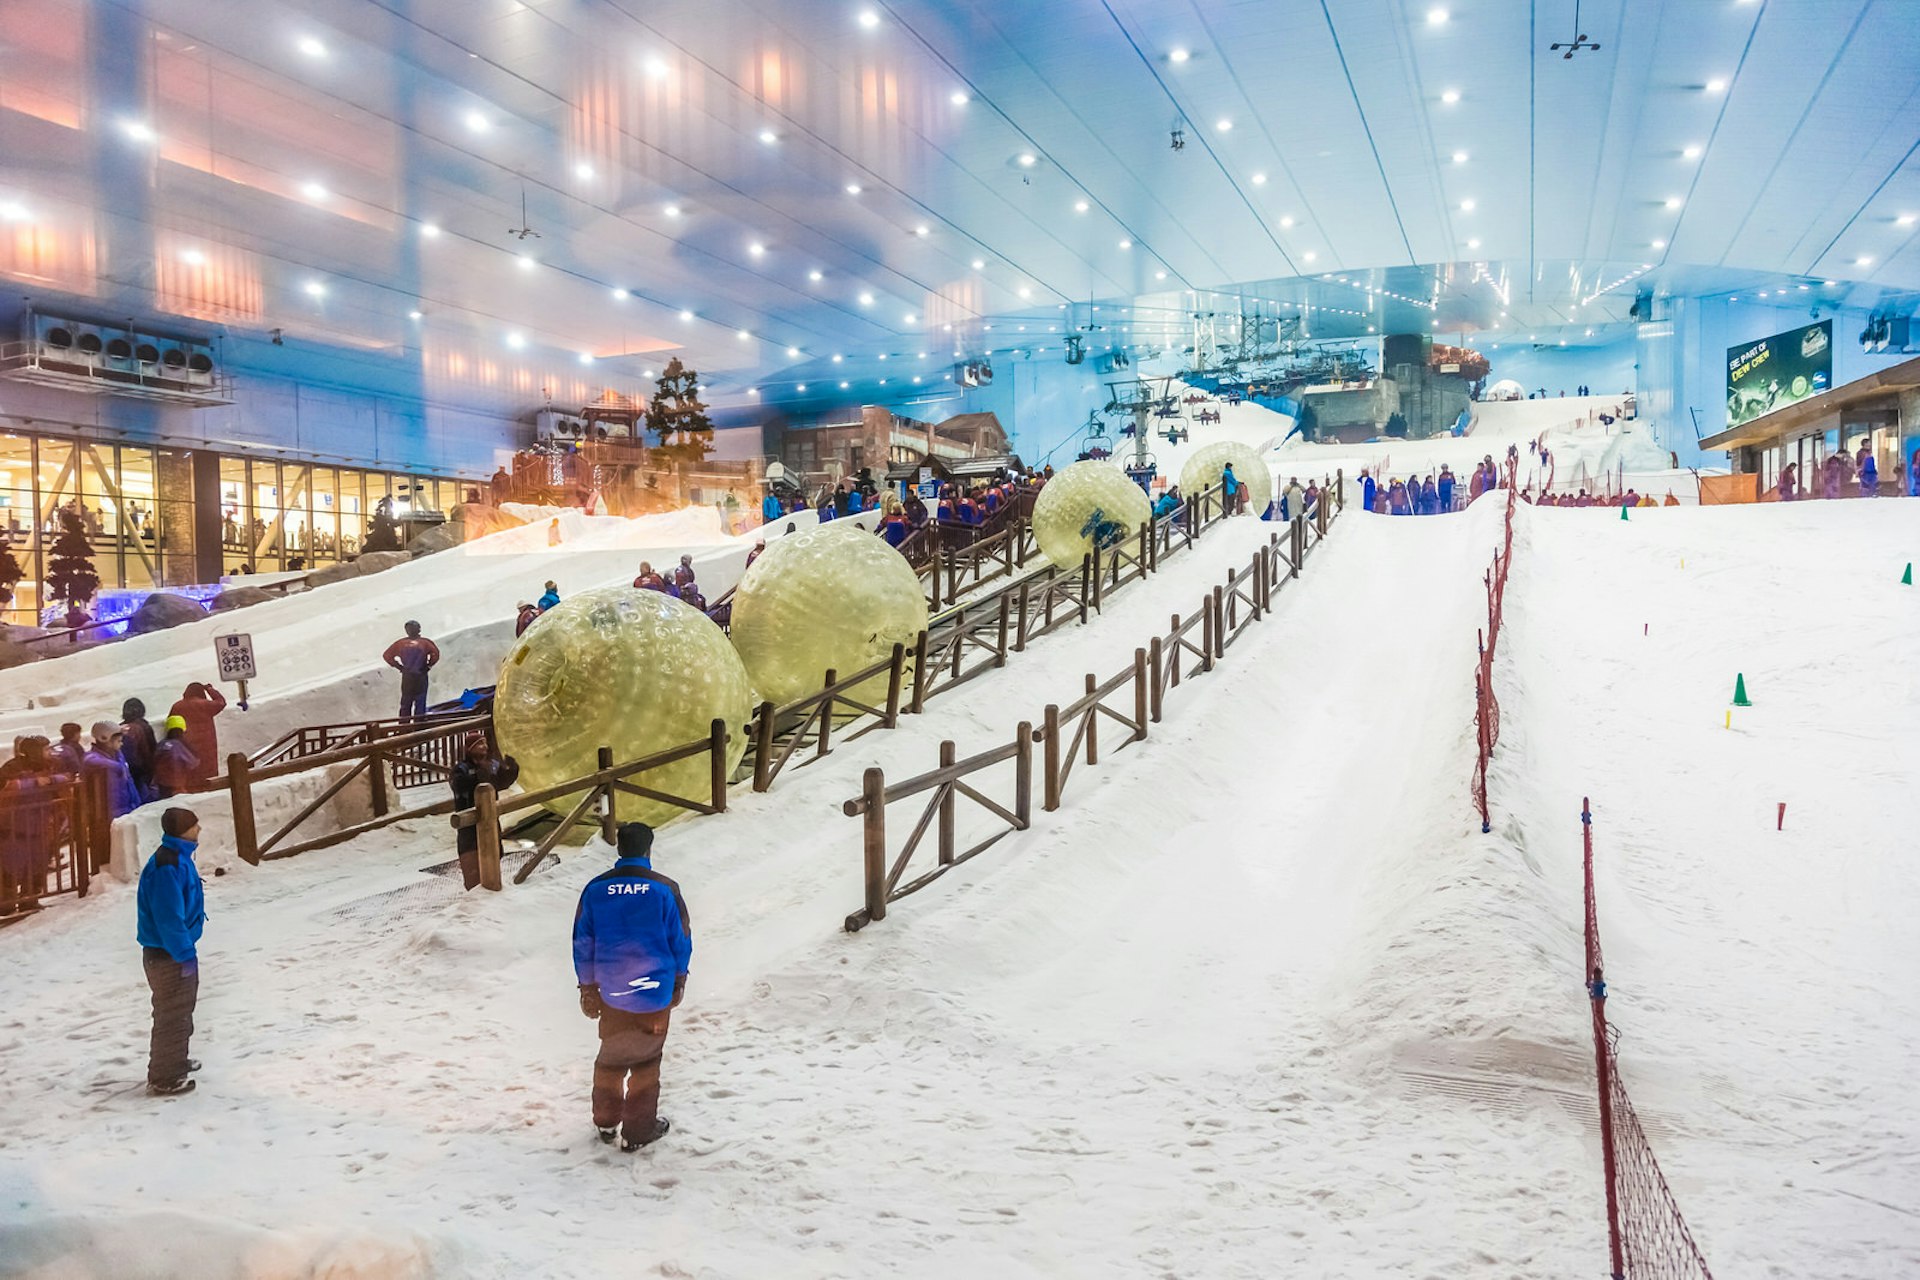 Ski Dubai is an indoor ski resort with 22,500 square meters of indoor ski area. It is a part of the Mall of the Emirates